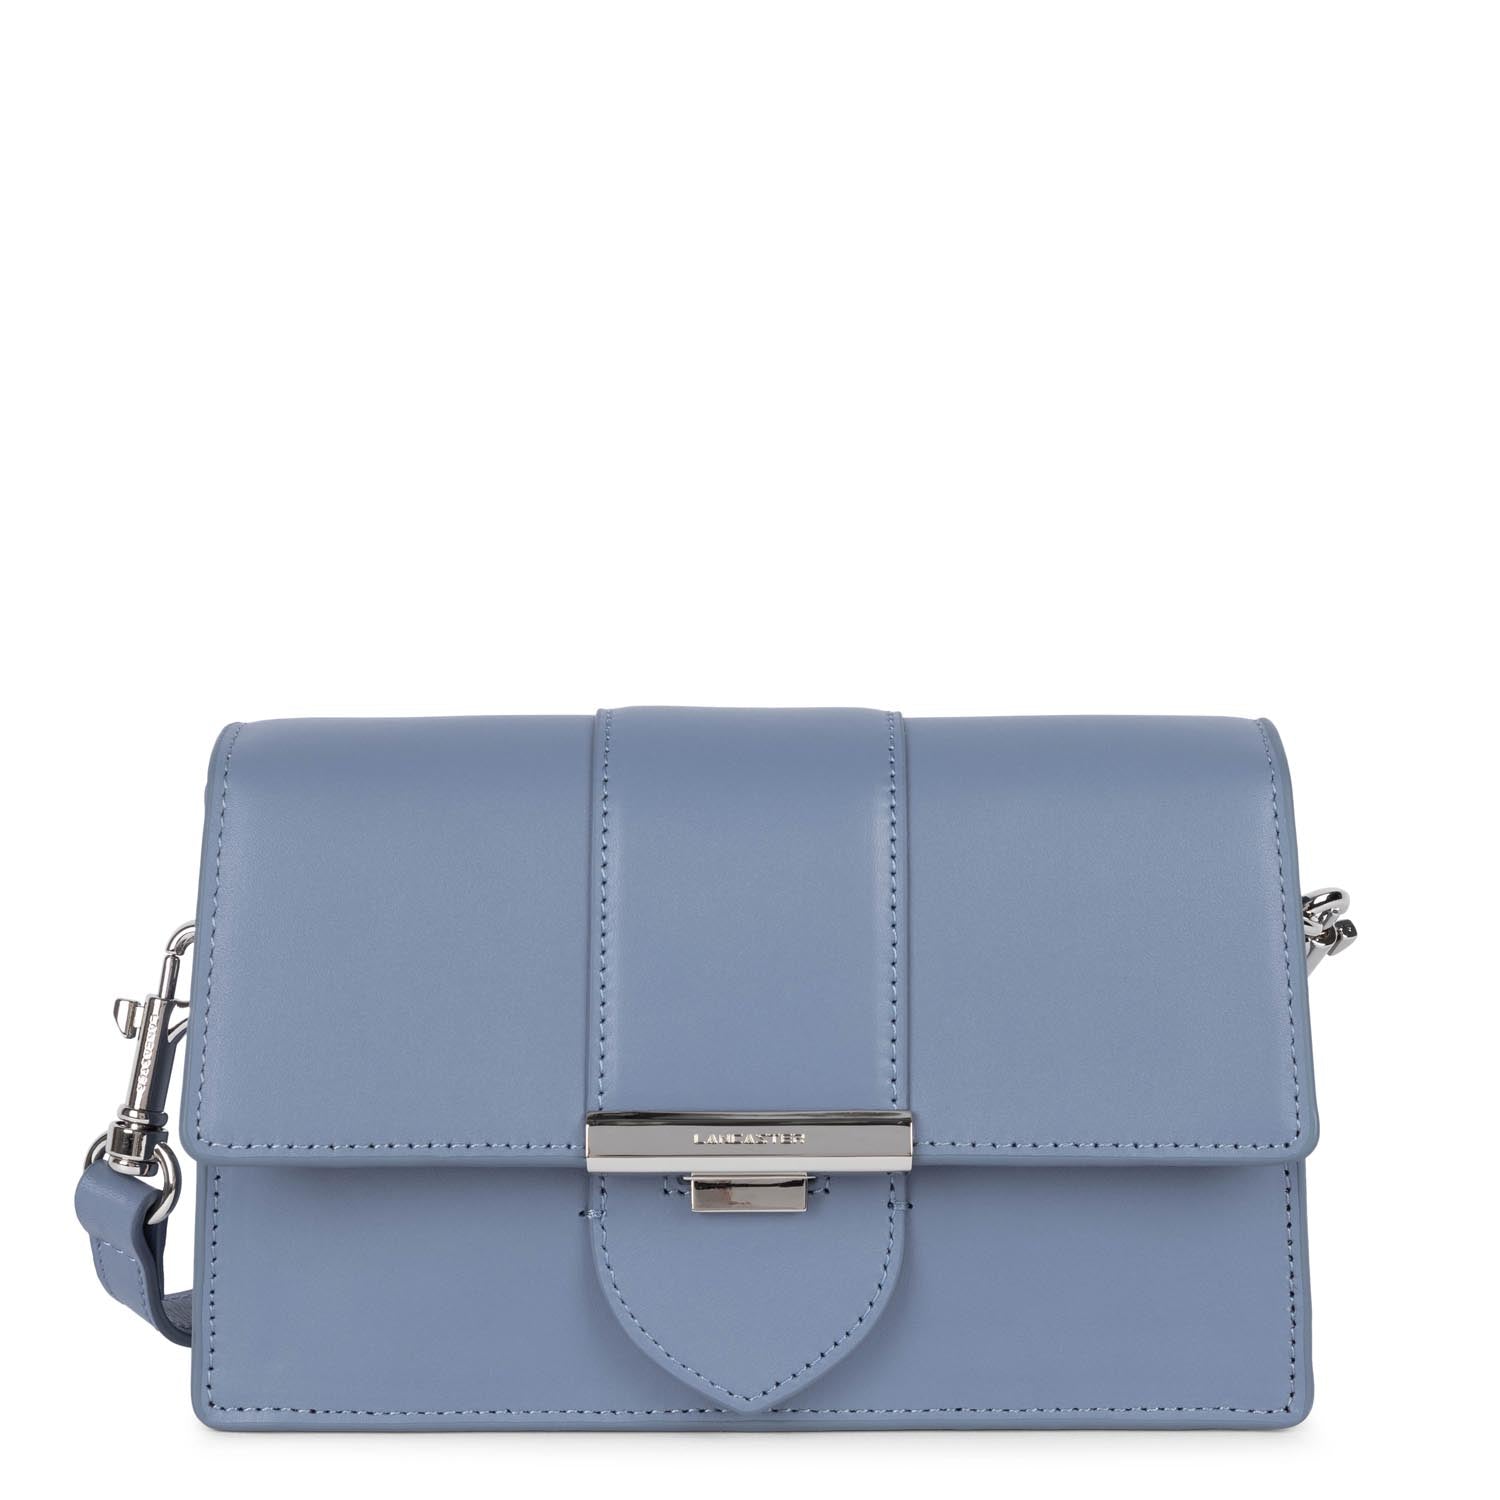 Lancaster Trotter bag with flap and clasp Paris Ily  531-012 Stone Blue